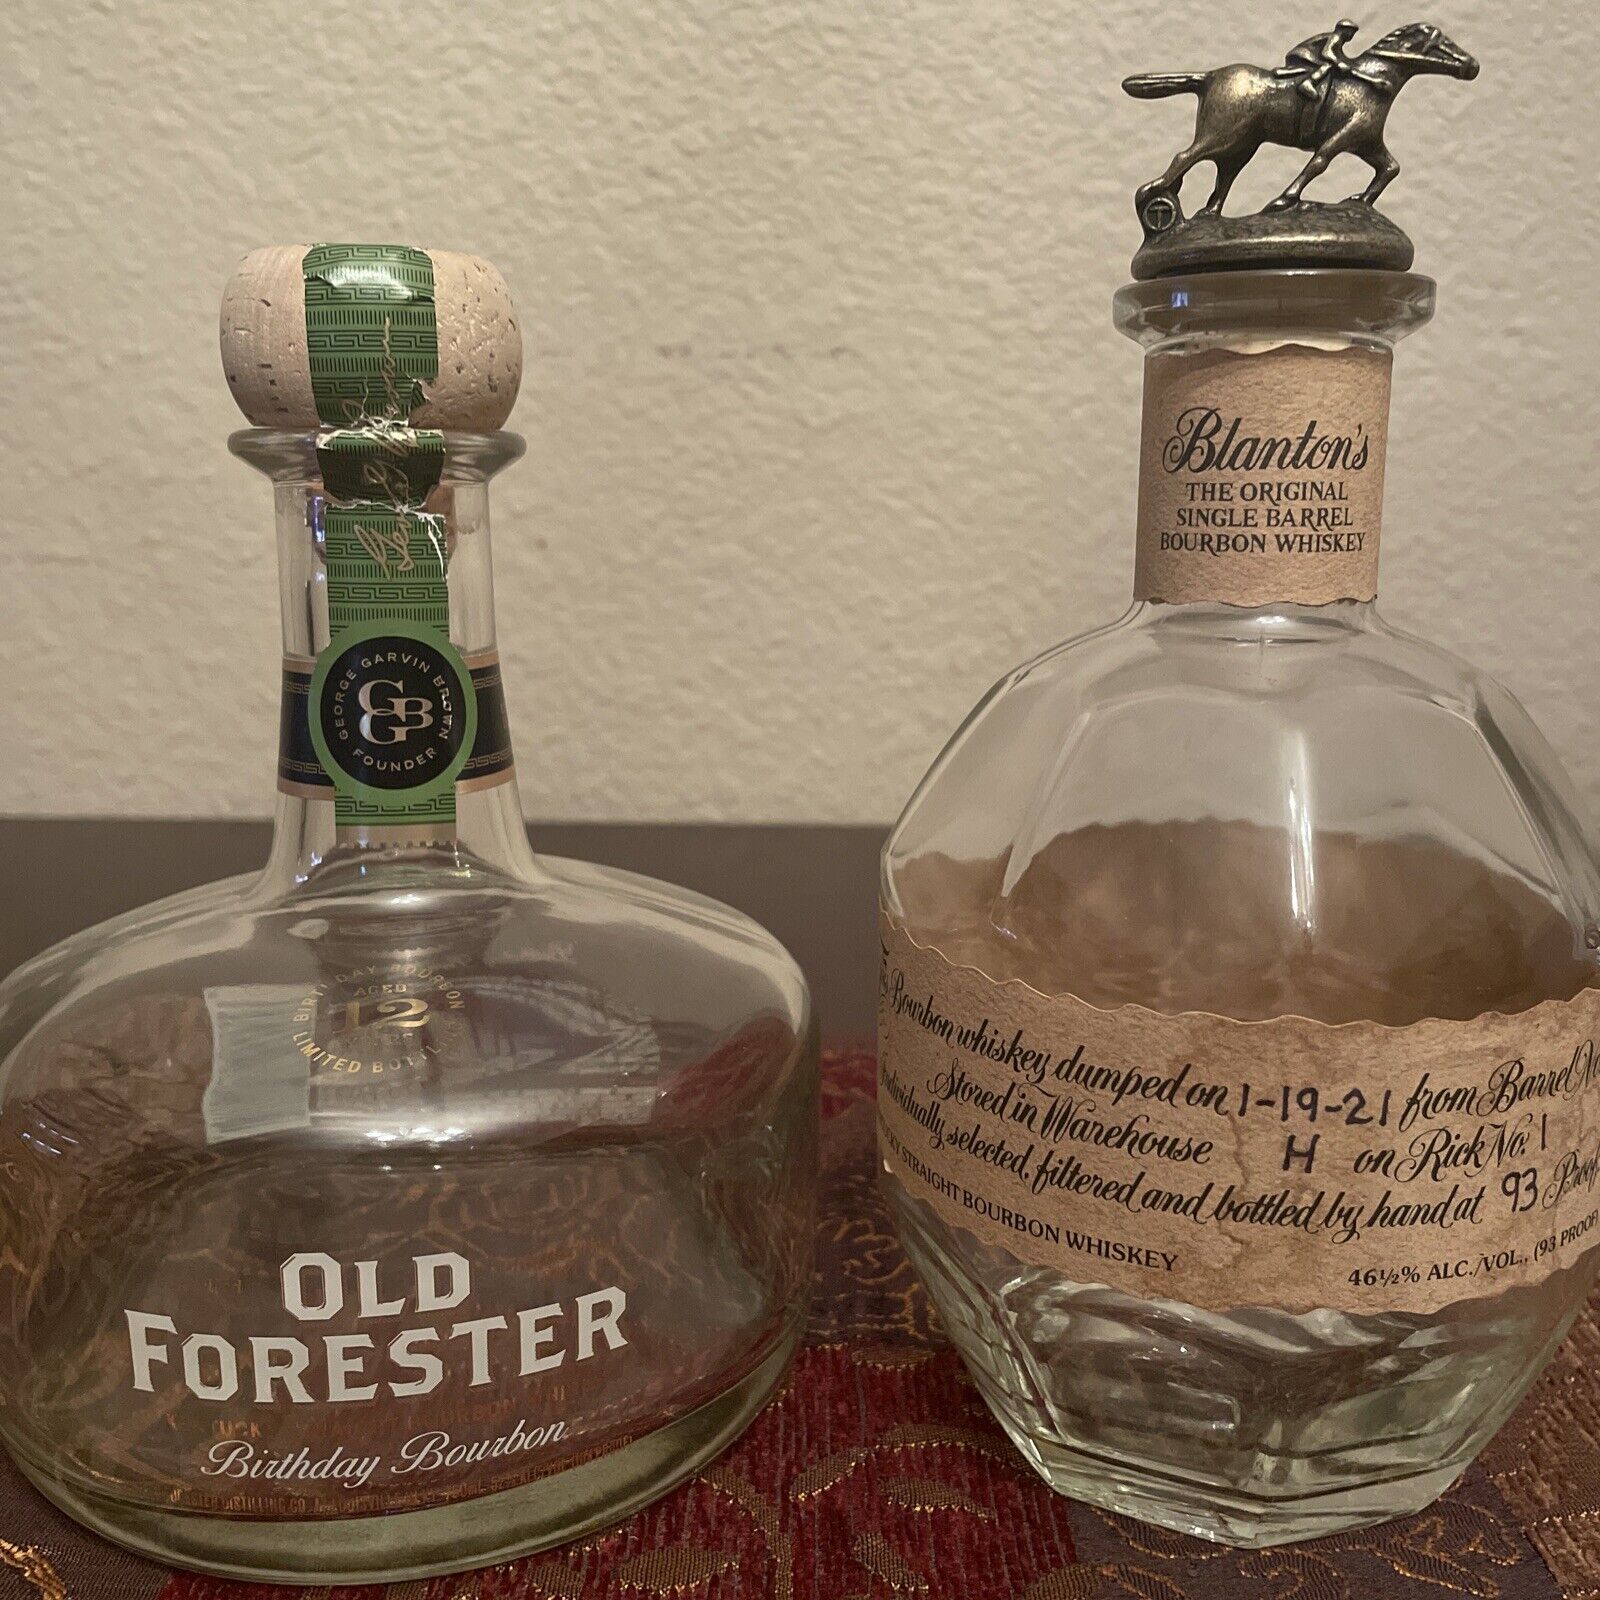 1 Old Forester Birthday Bourbon & 1 Blanton’s Single Barrel with Top Letter “T”